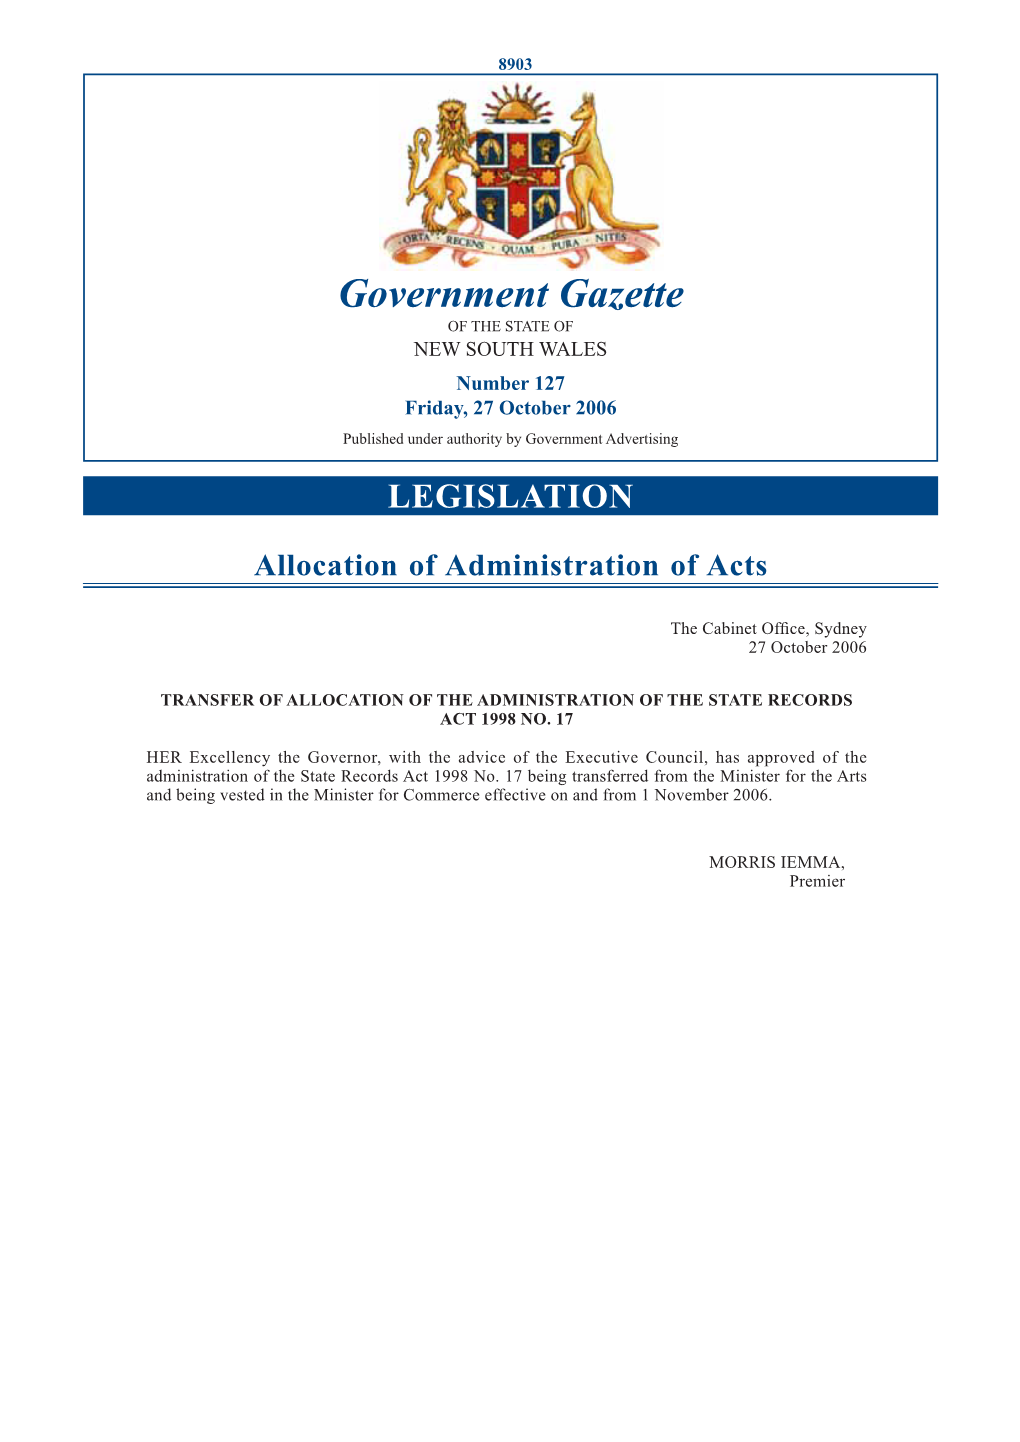 Government Gazette of the STATE of NEW SOUTH WALES Number 127 Friday, 27 October 2006 Published Under Authority by Government Advertising LEGISLATION